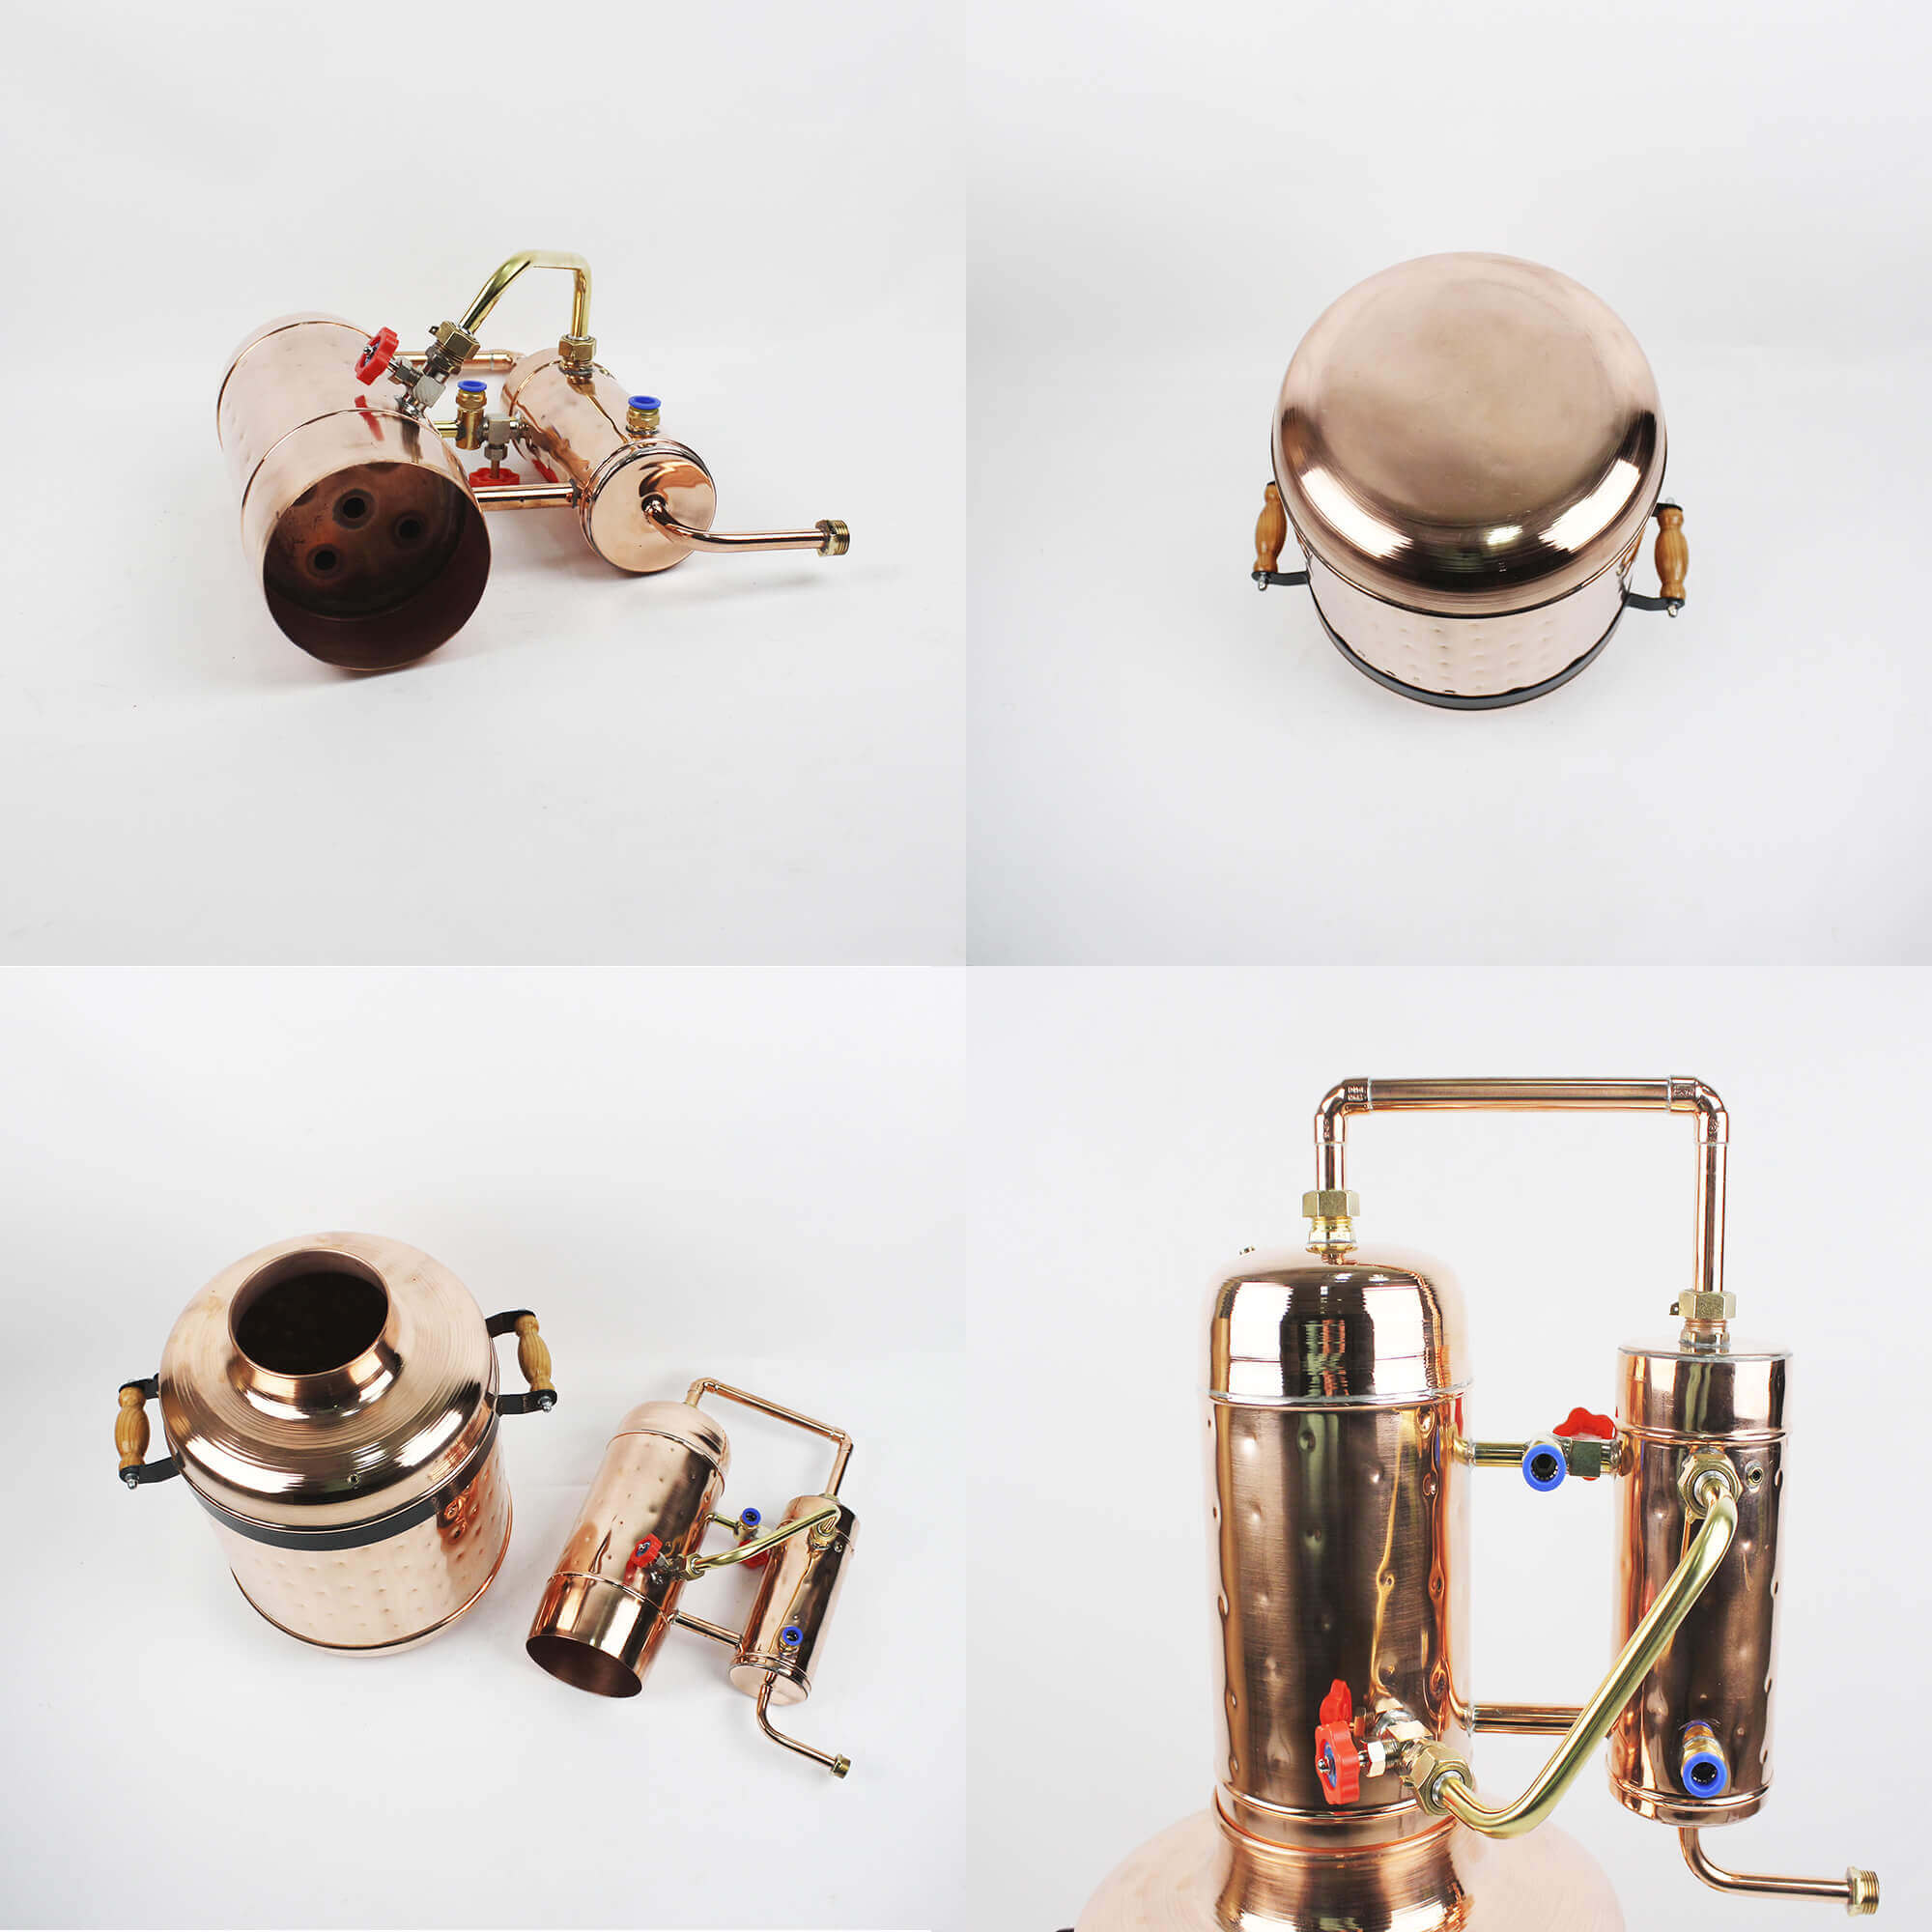 Parts of copper moonshine distiller from copper pro